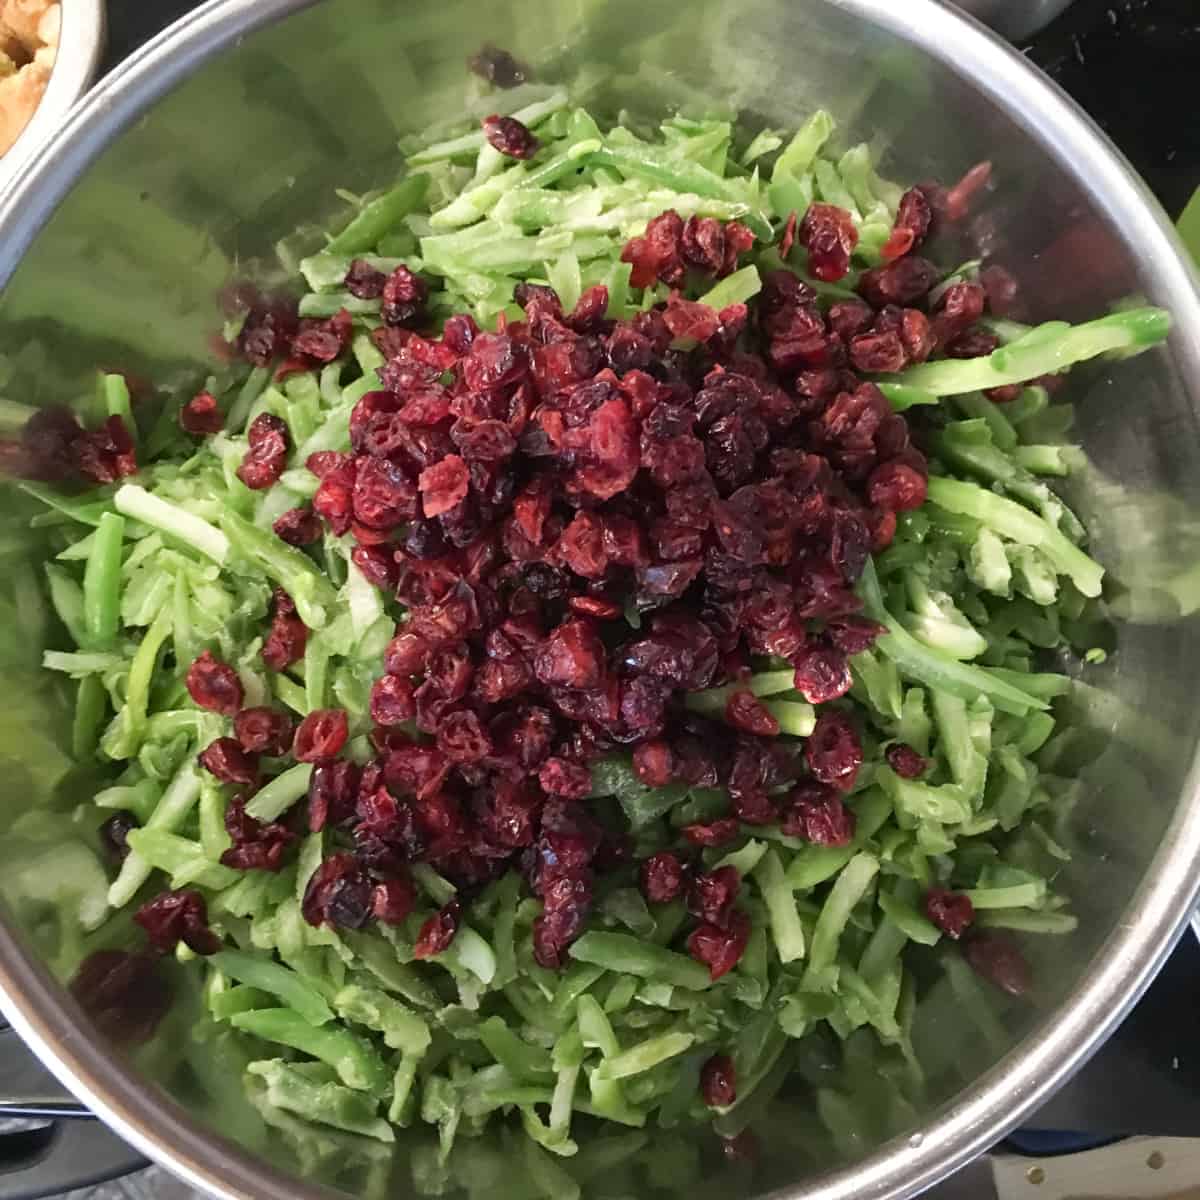 Bright french style green beans are mixed with dried cranberries in a large stainless steel bowl.